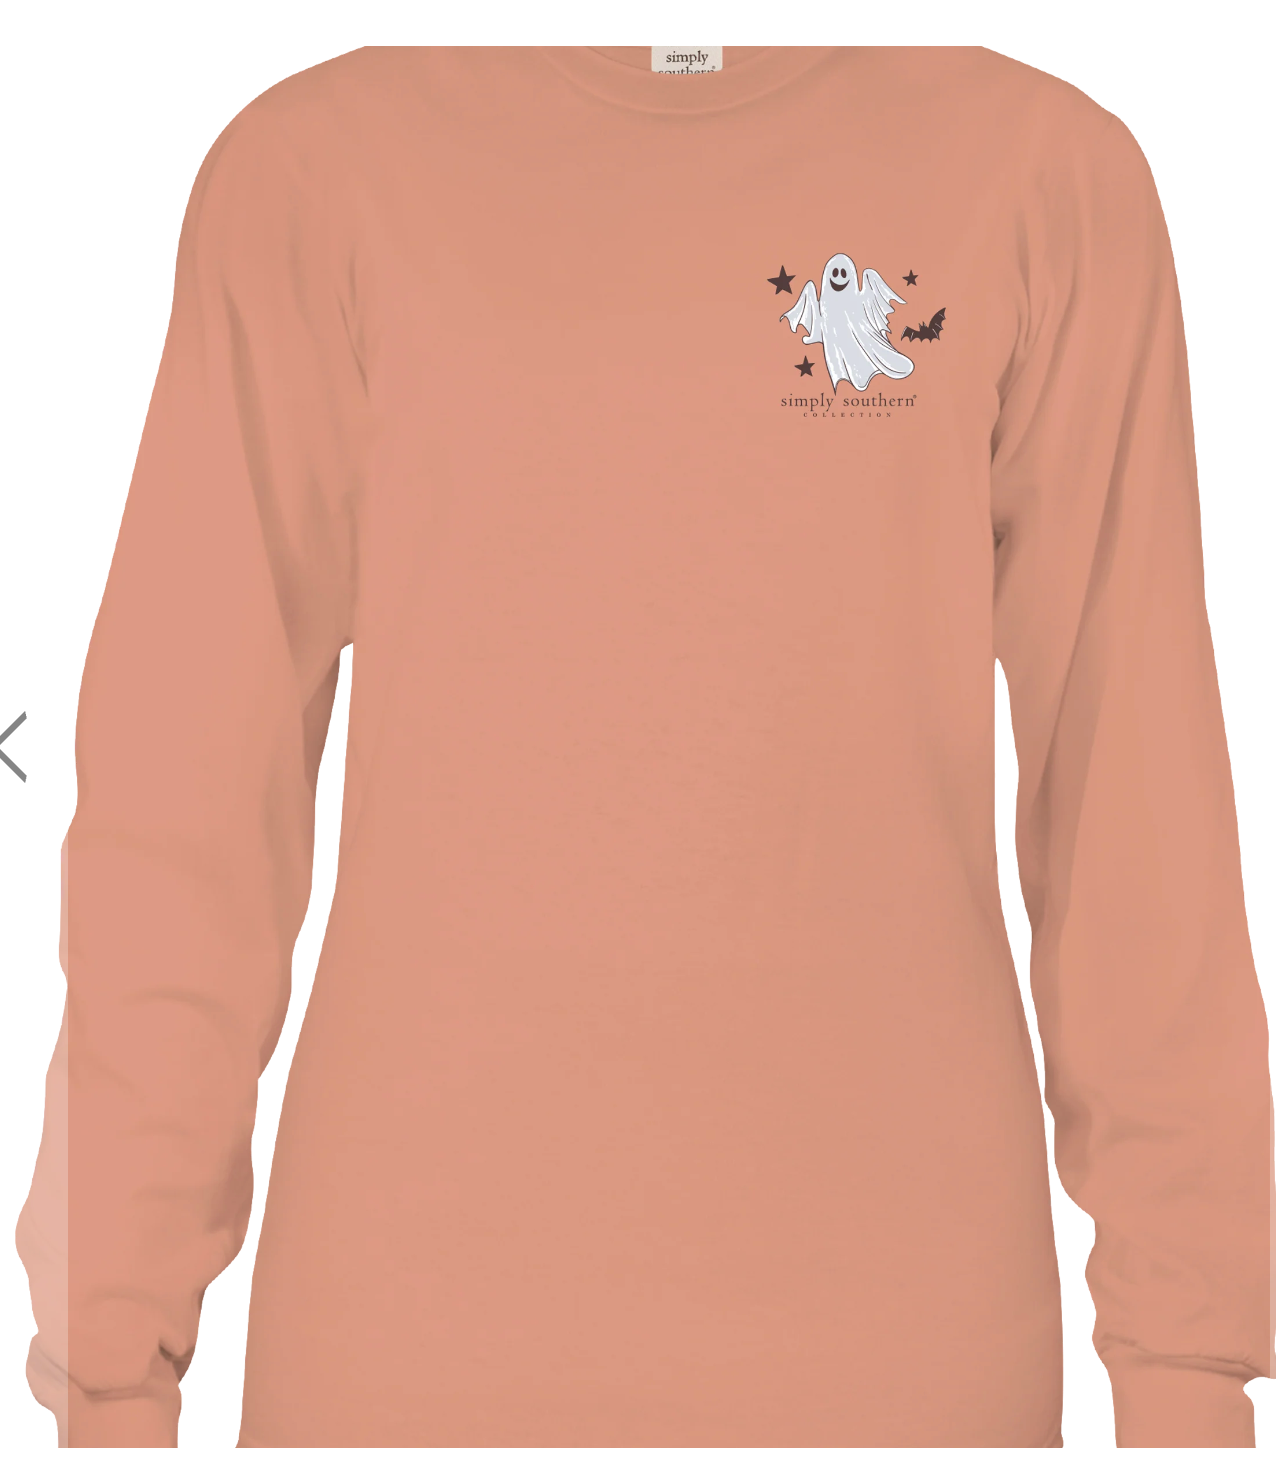 SIMPLY SOUTHERN SPOOKY YOUTH LONG SLEEVE